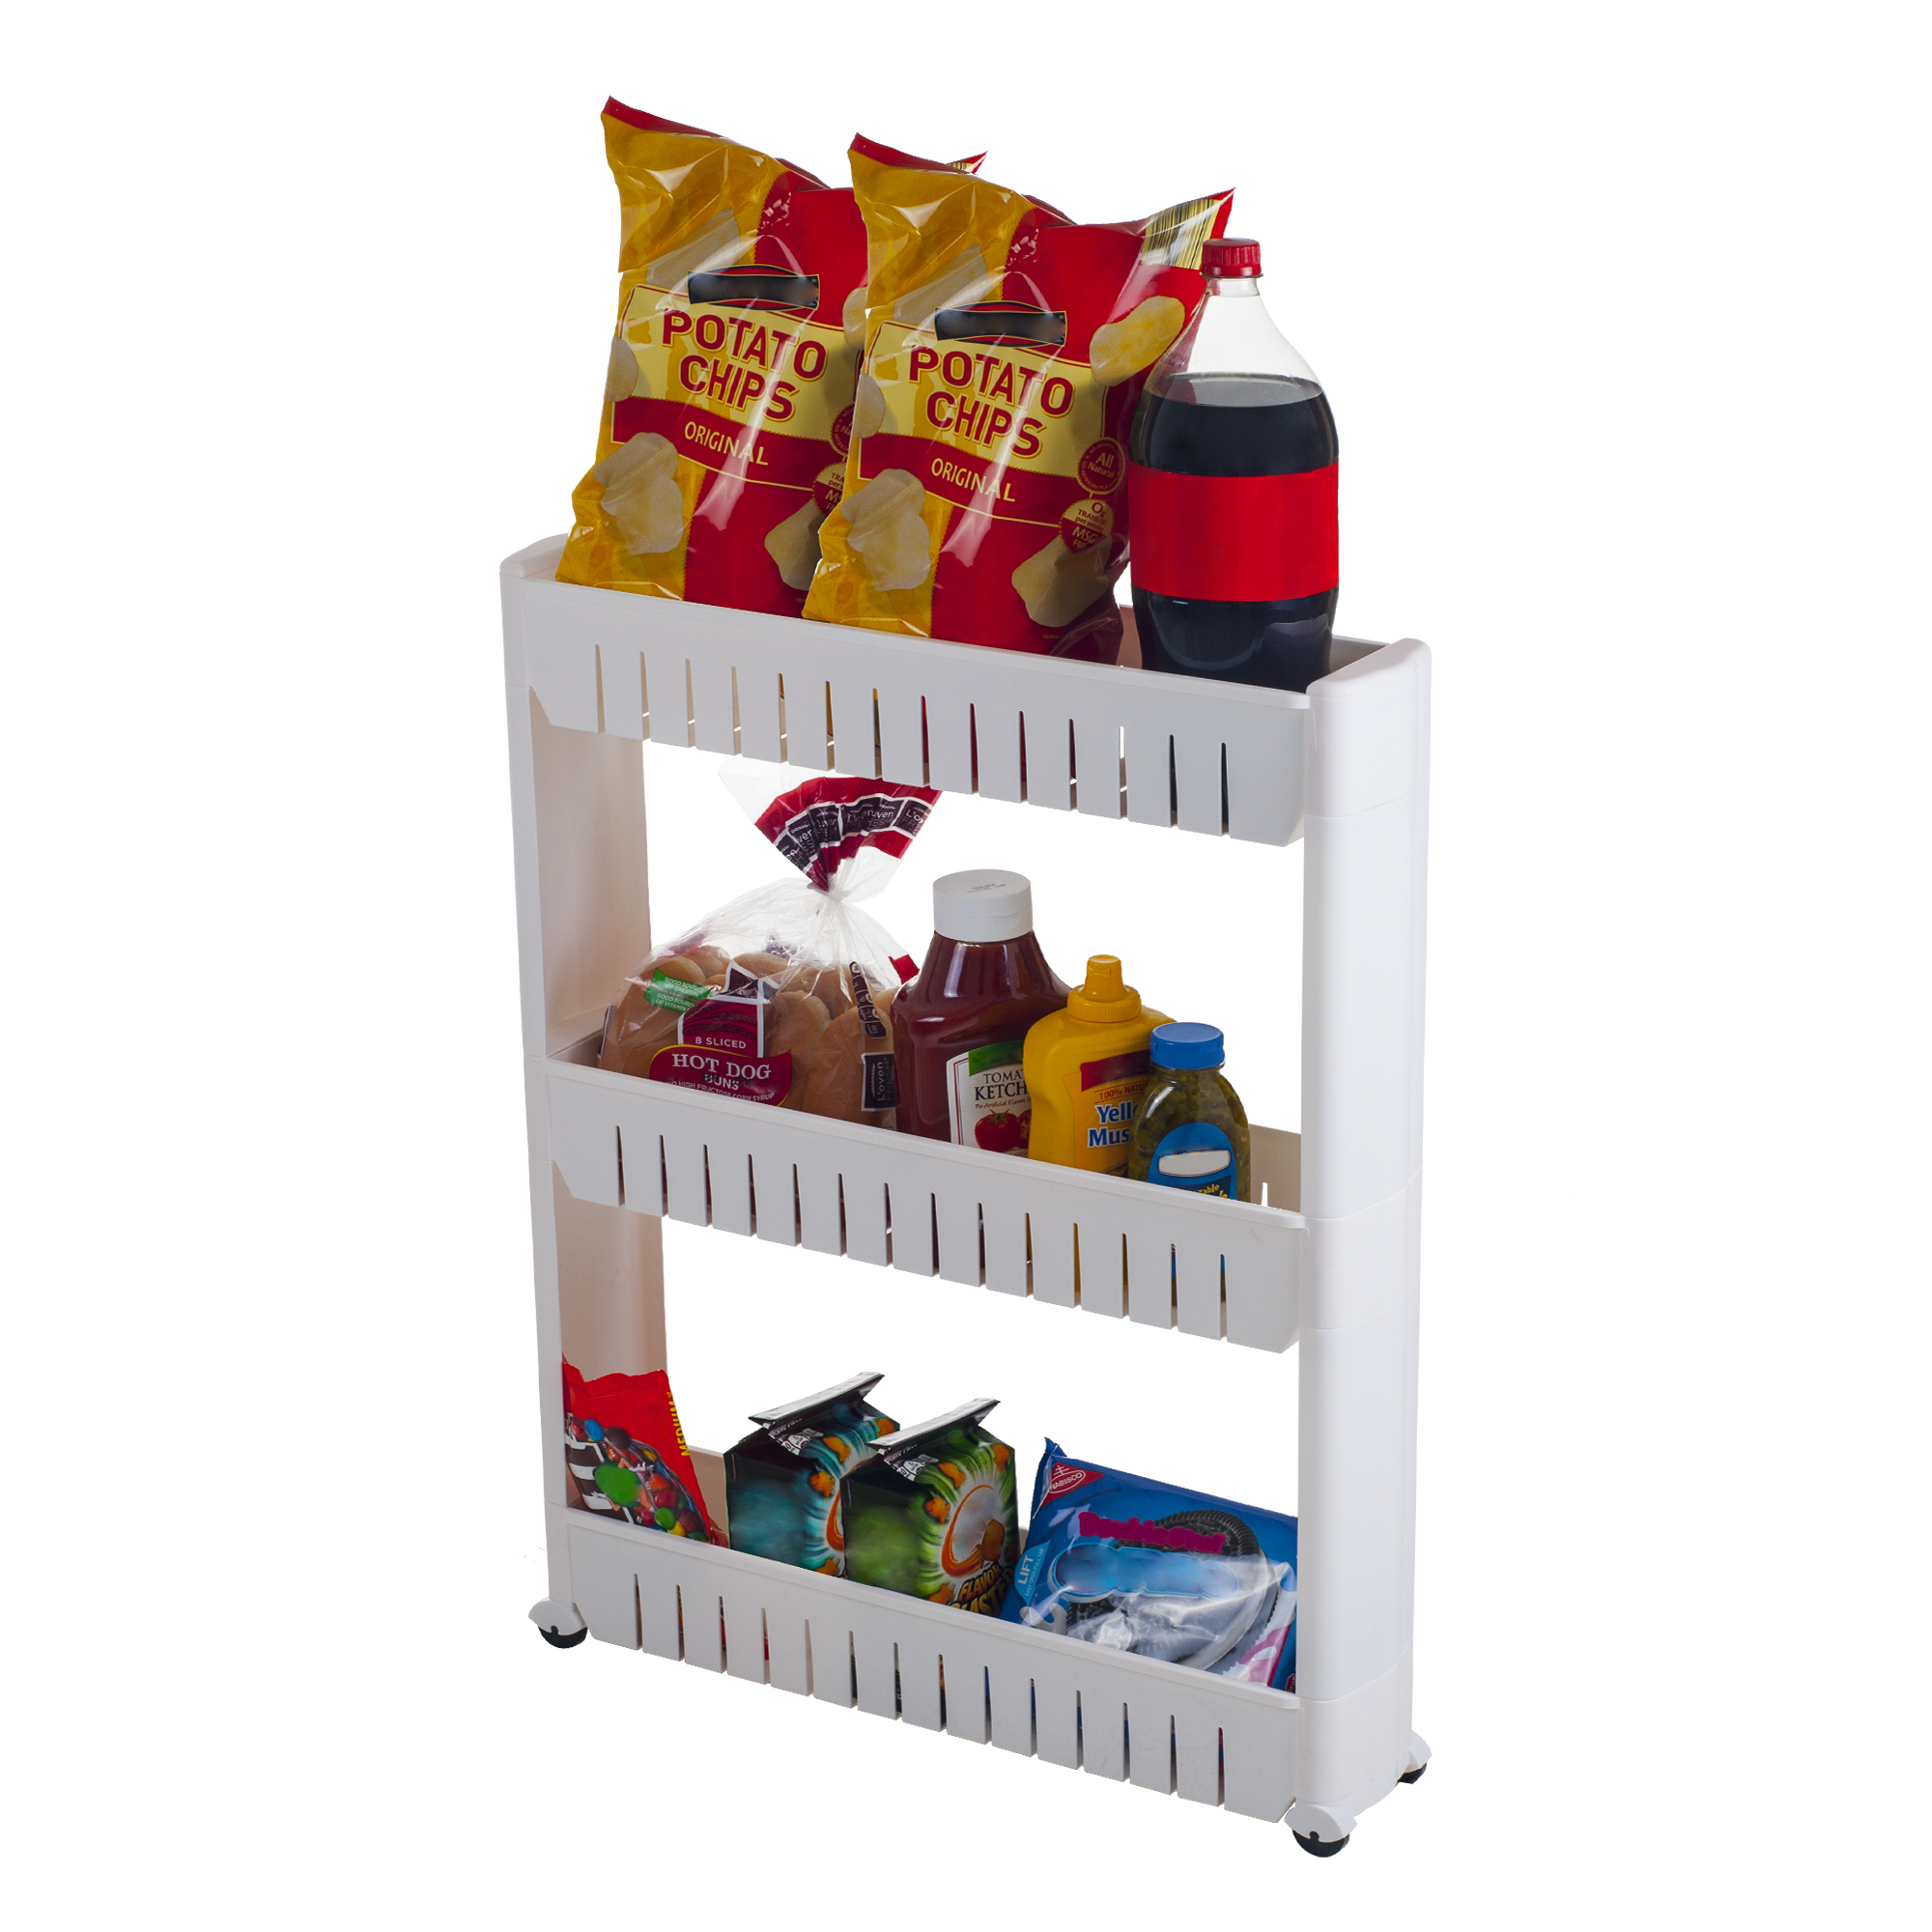 Everyday Home Portable Plastic Shelving Unit Organizer with 3 Large Storage Baskets, up to 100lb capacity - image 2 of 5